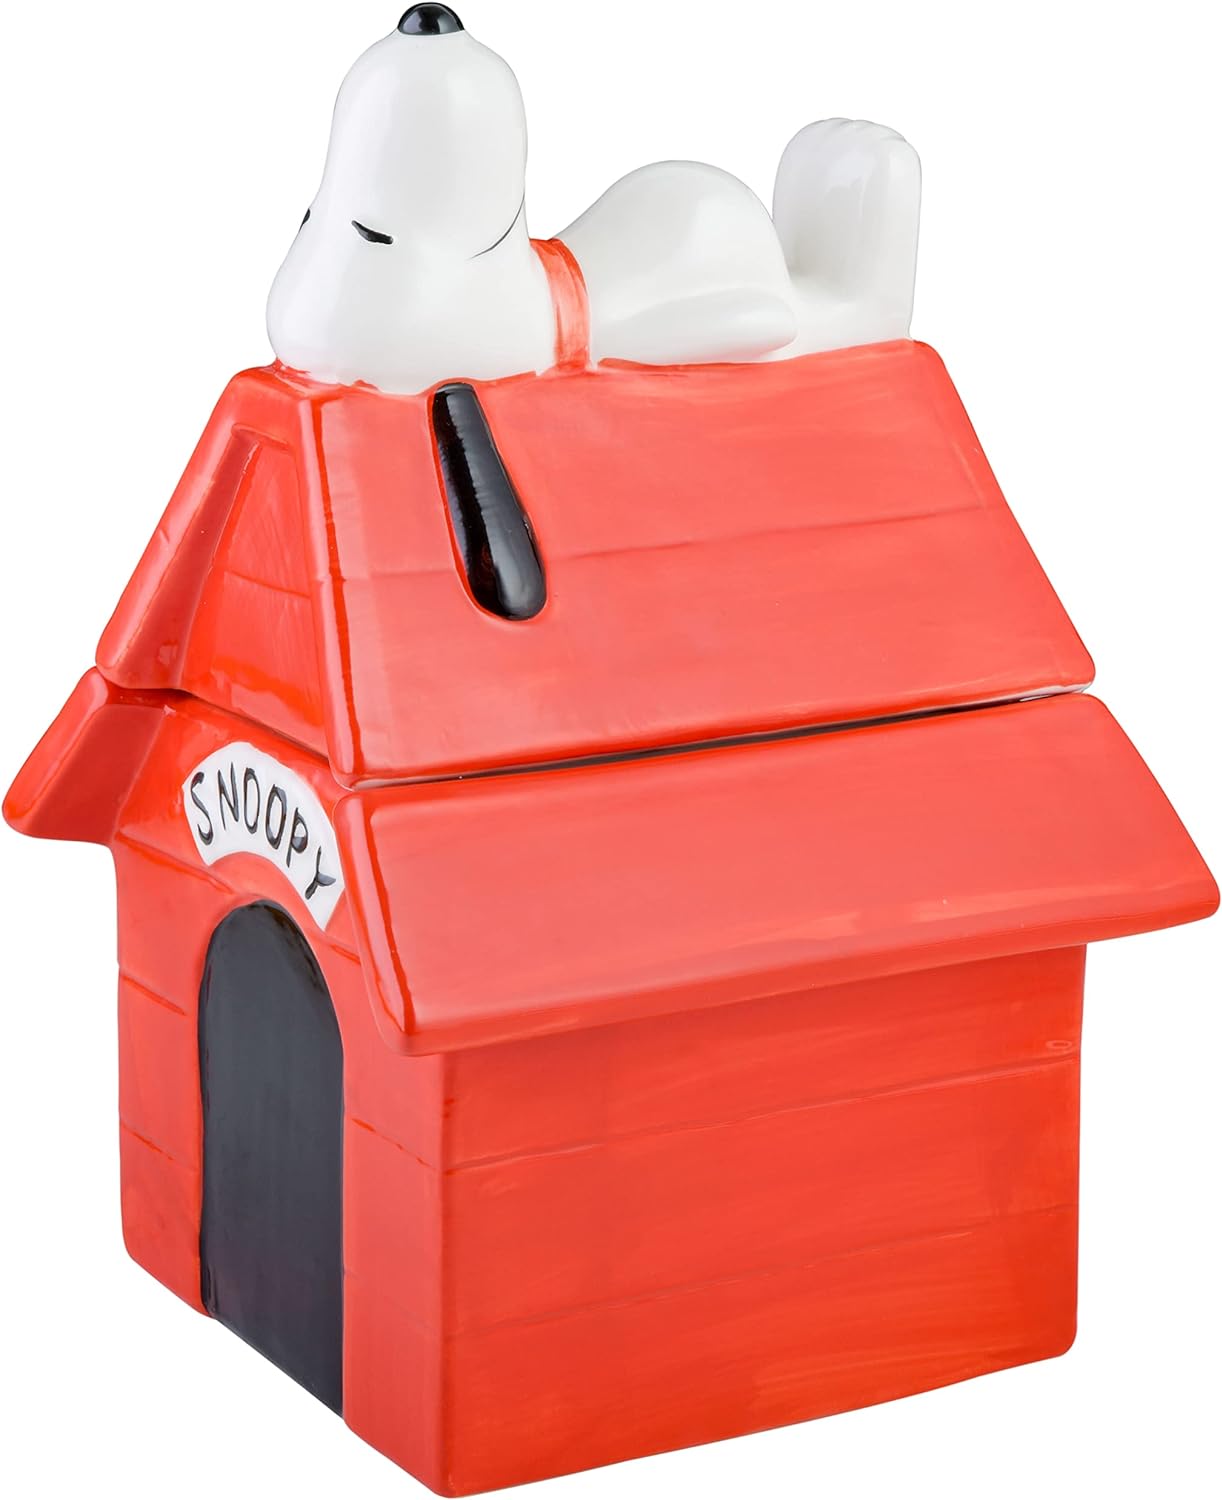 11.2" Peanuts Classic Snoopy Doghouse Cookie Jar